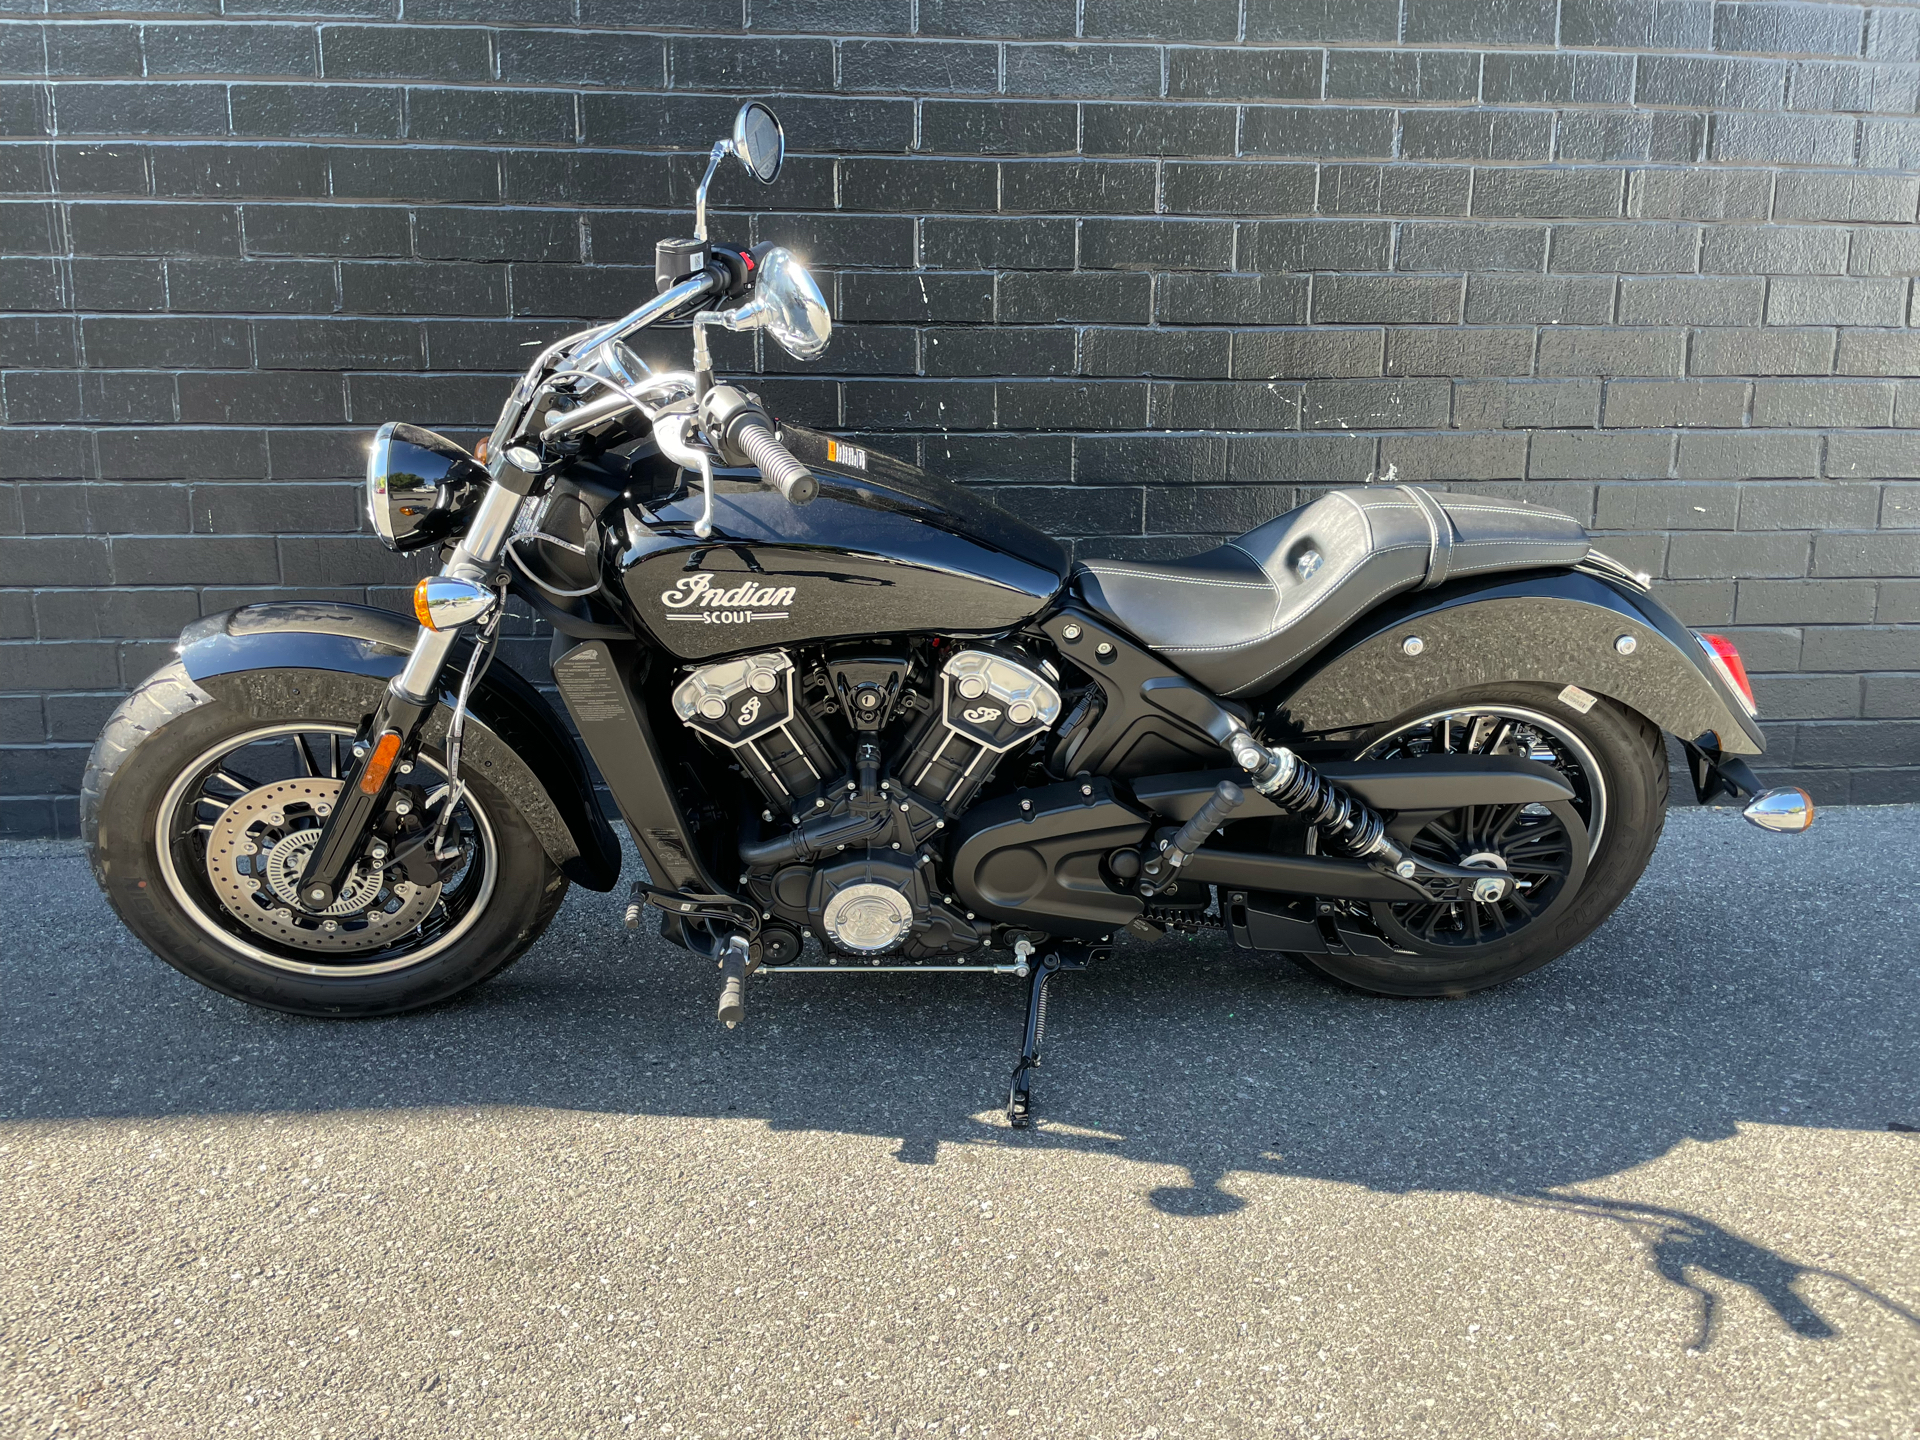 2022 Indian Scout® ABS in San Jose, California - Photo 4